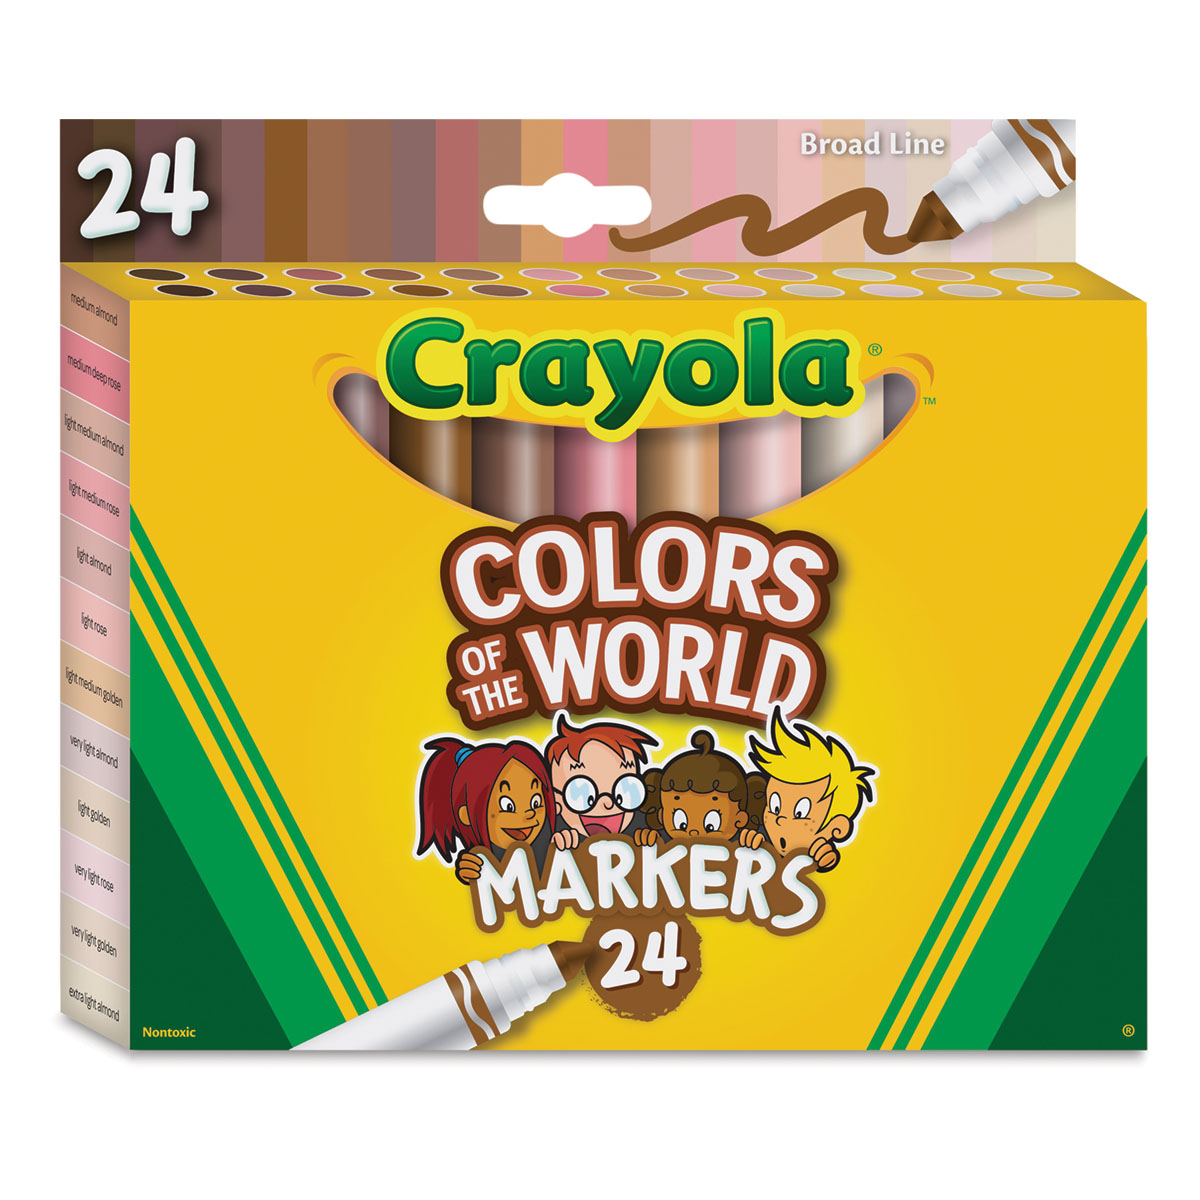 Colors of the World Construction Paper, Crayola.com